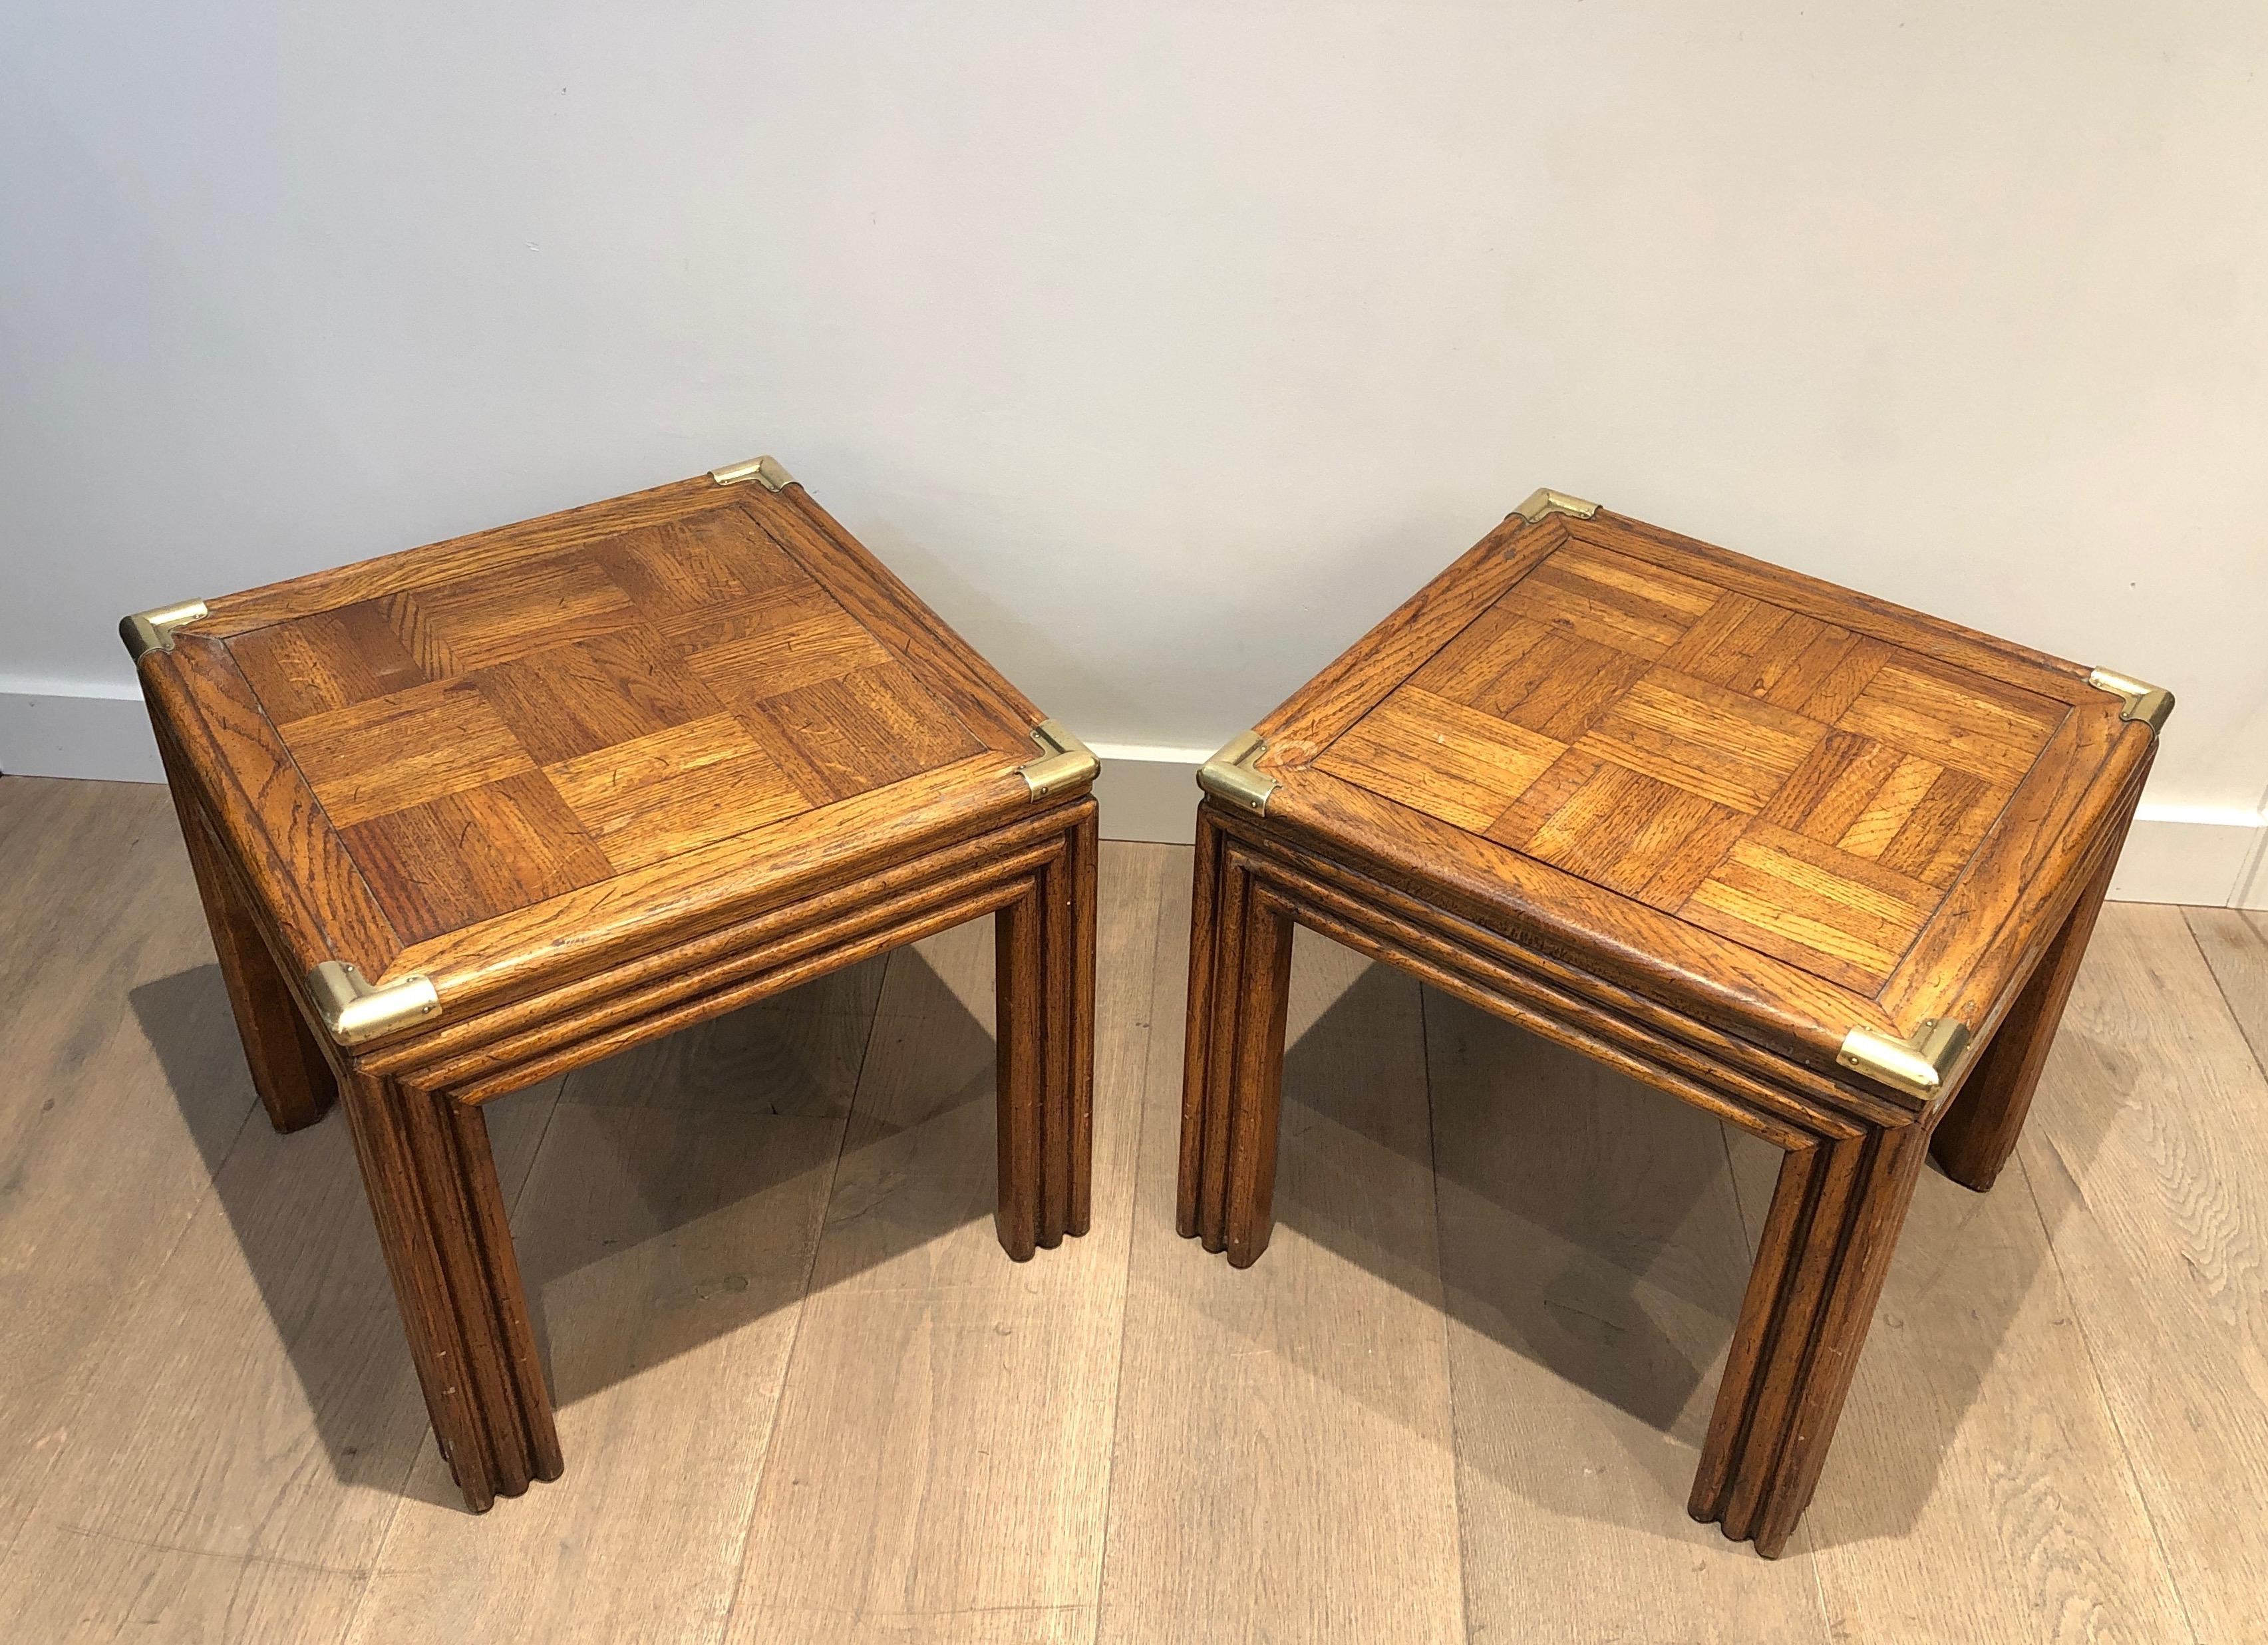 This pair side tables is made of wood and brass with wood marquetry on tops. French work. Circa 1970.